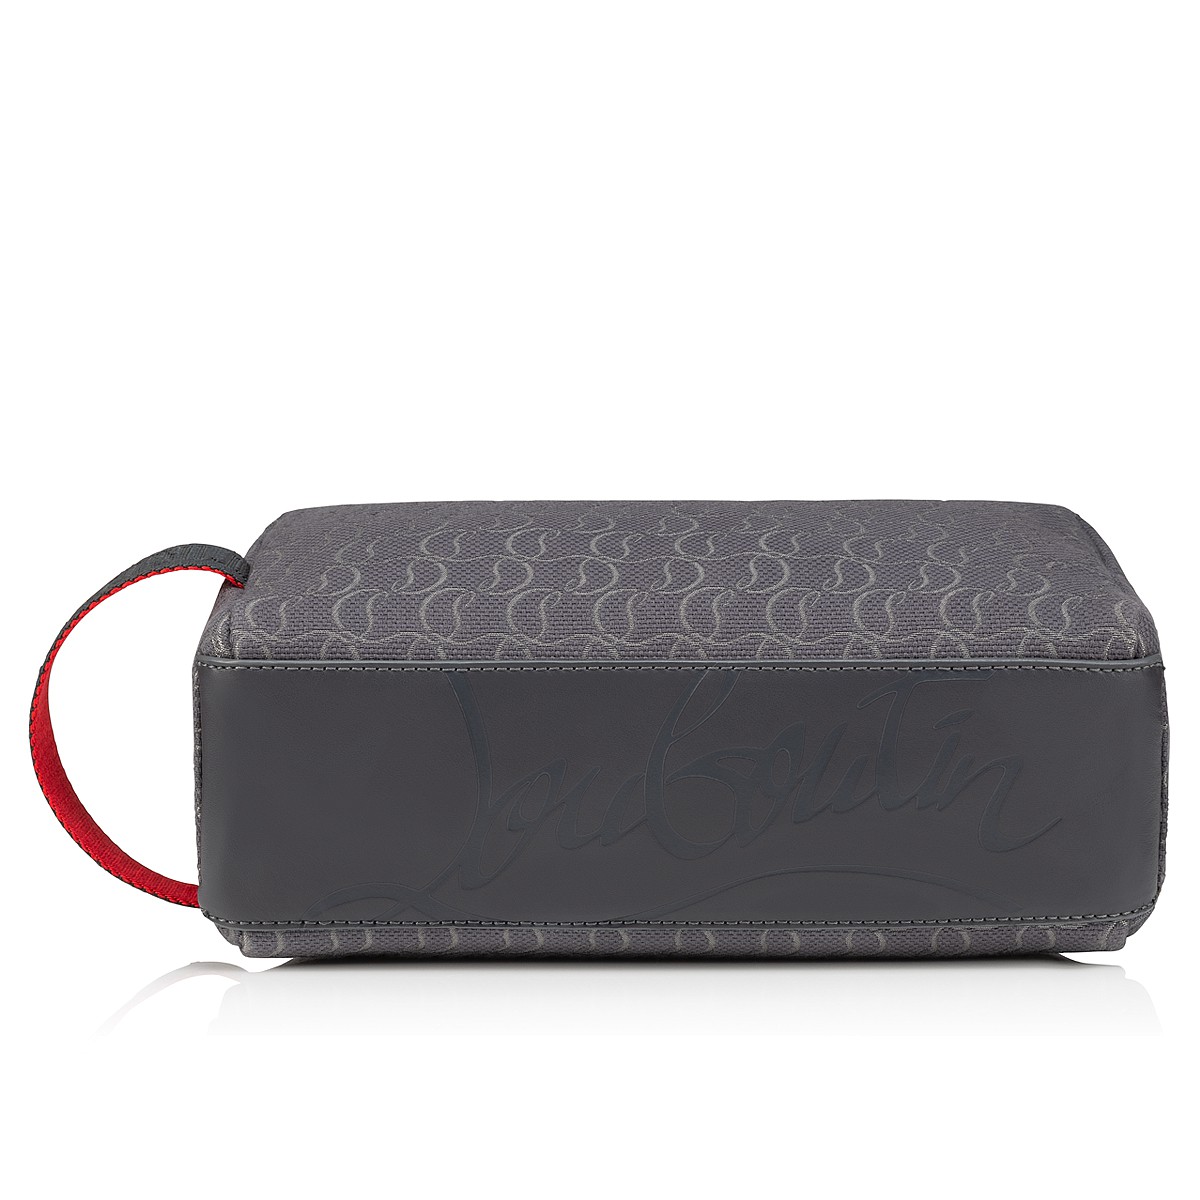 Small Leather Goods - Zip N Flap - Christian Louboutin